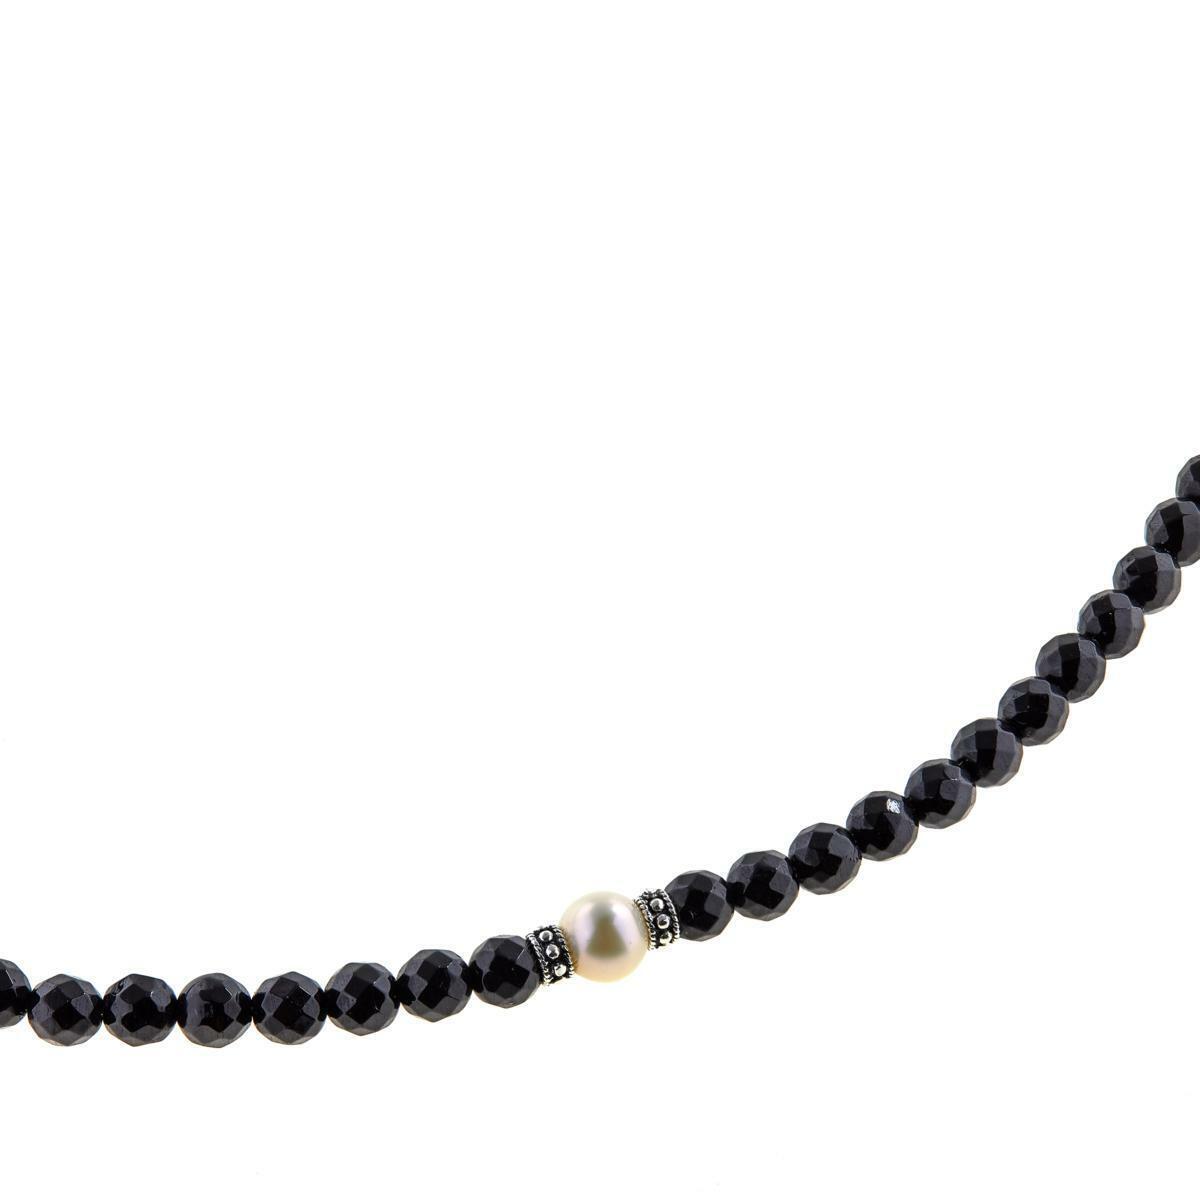 Ottoman Silver Jewelry Black Spinel and Cultured Pearl 40" Necklace